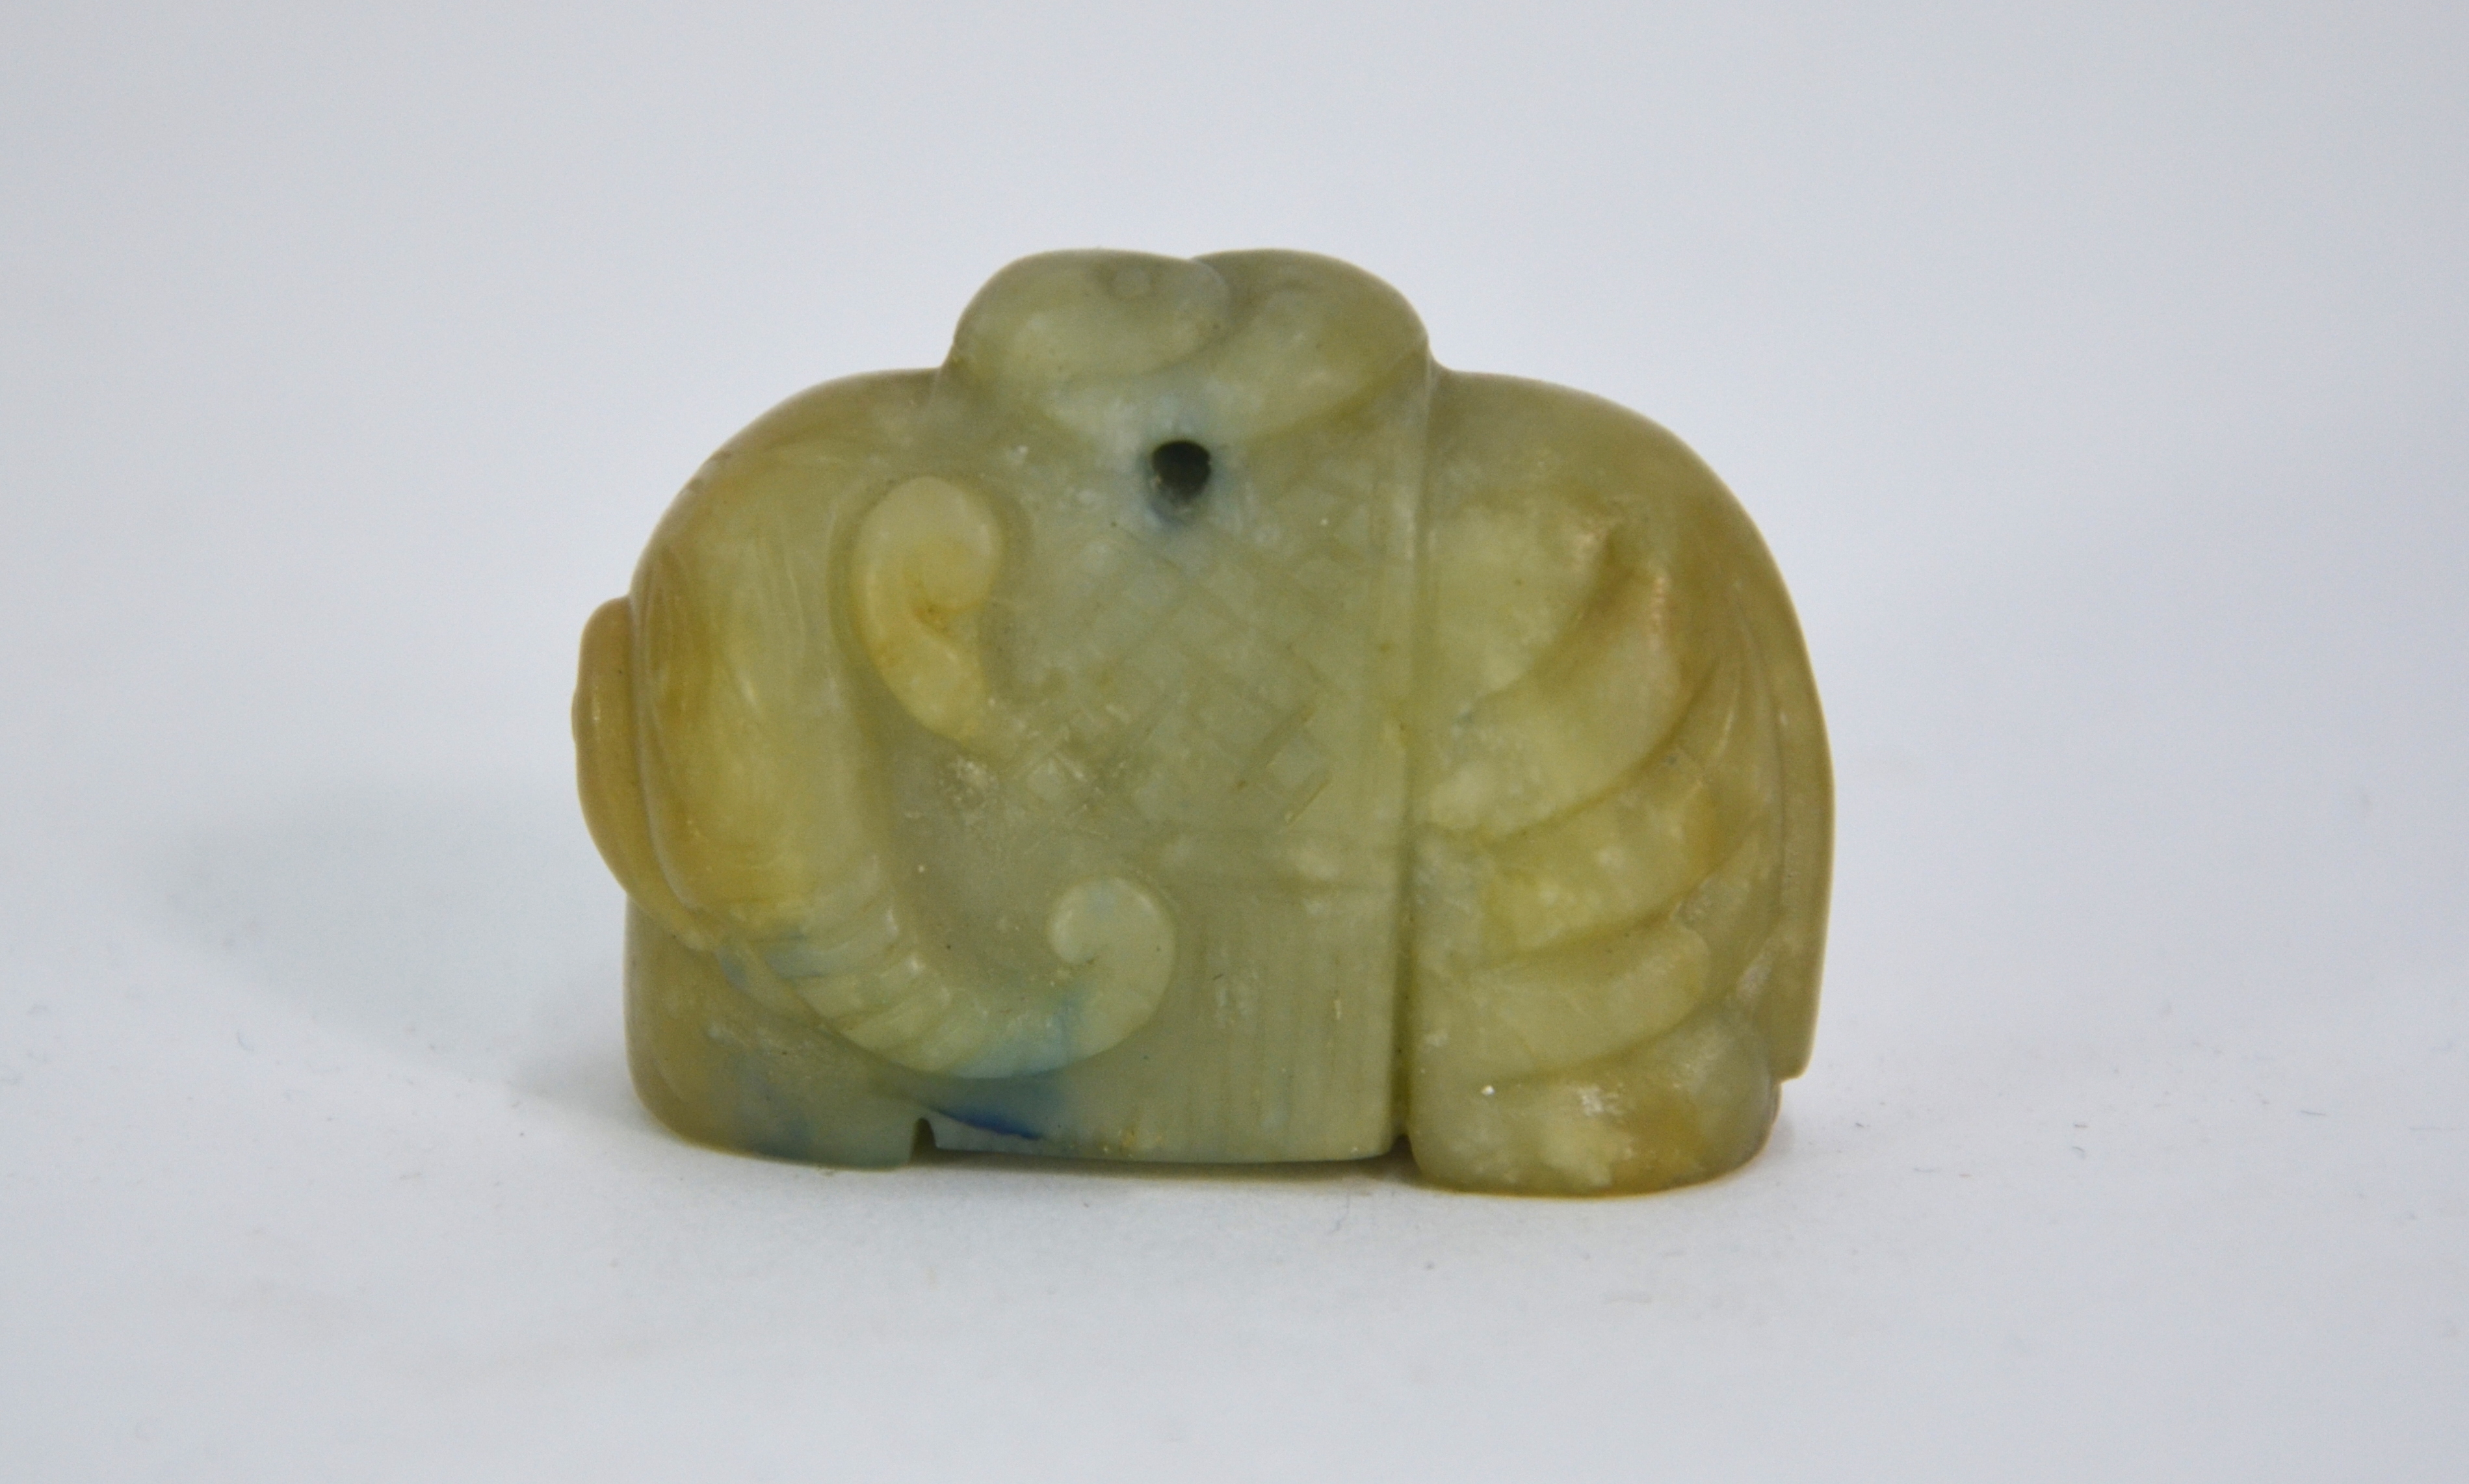 A mottled green stone figure of a standing elephant looking to the left and wearing a long howdah